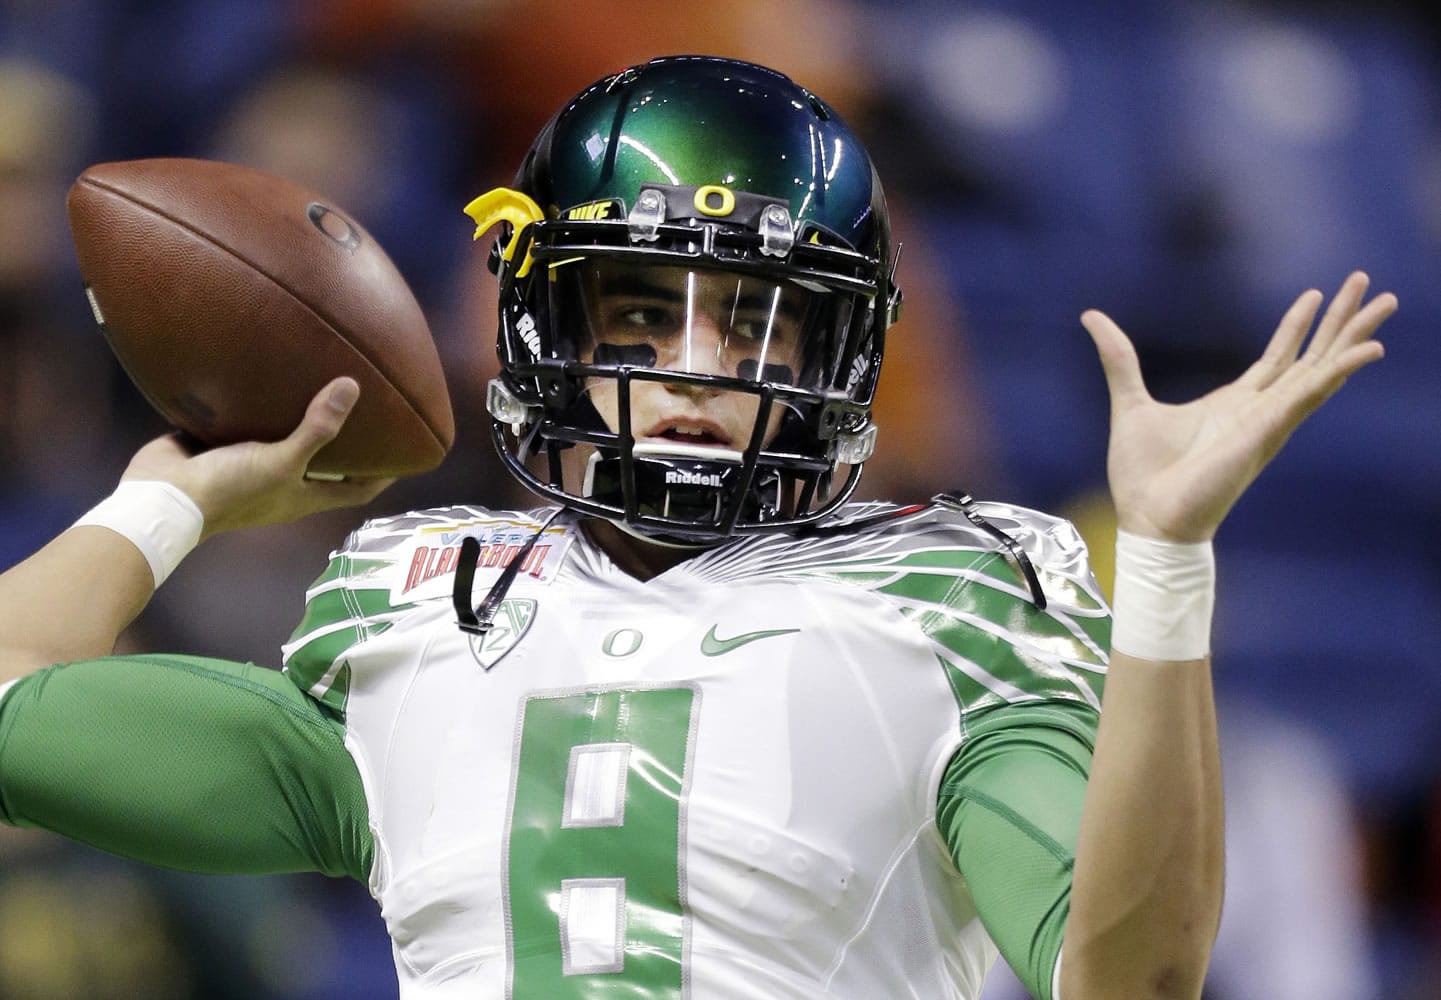 Oregon's Marcus Mariota warms up for the Valero Alamo Bowl NCAA college football game against Texas in San Antonio on Dec. 30, 2013. All eyes will be on Mariota when the Ducks take the field this season.